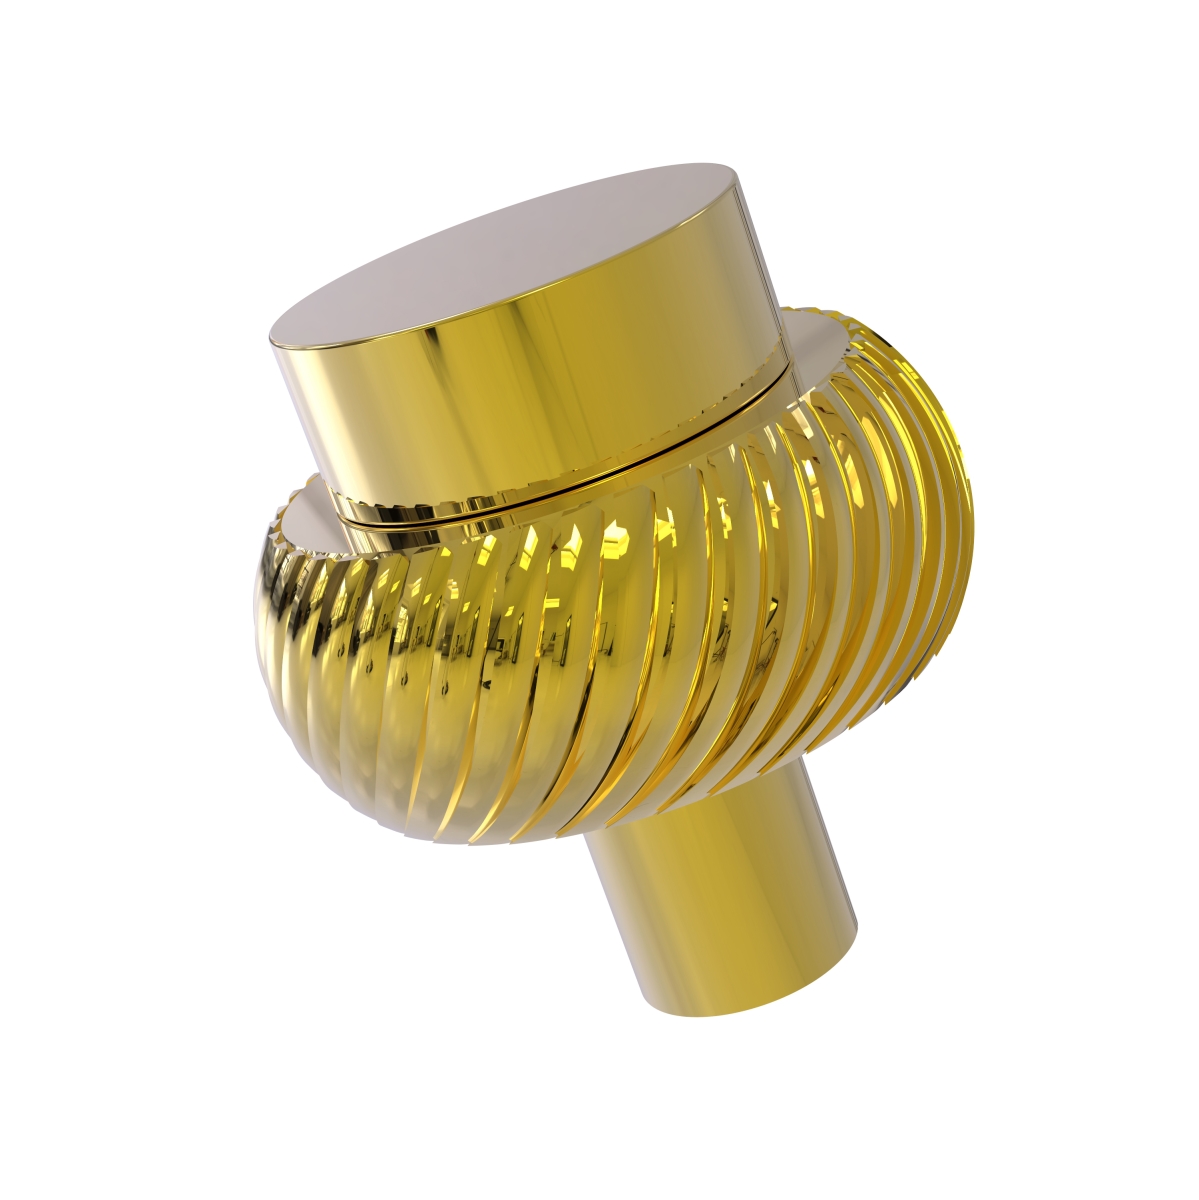 101t-unl 1.5 X 1.5 X 1.5 In. Cabinet Knob With Twist Ring, Unlacquered Brass